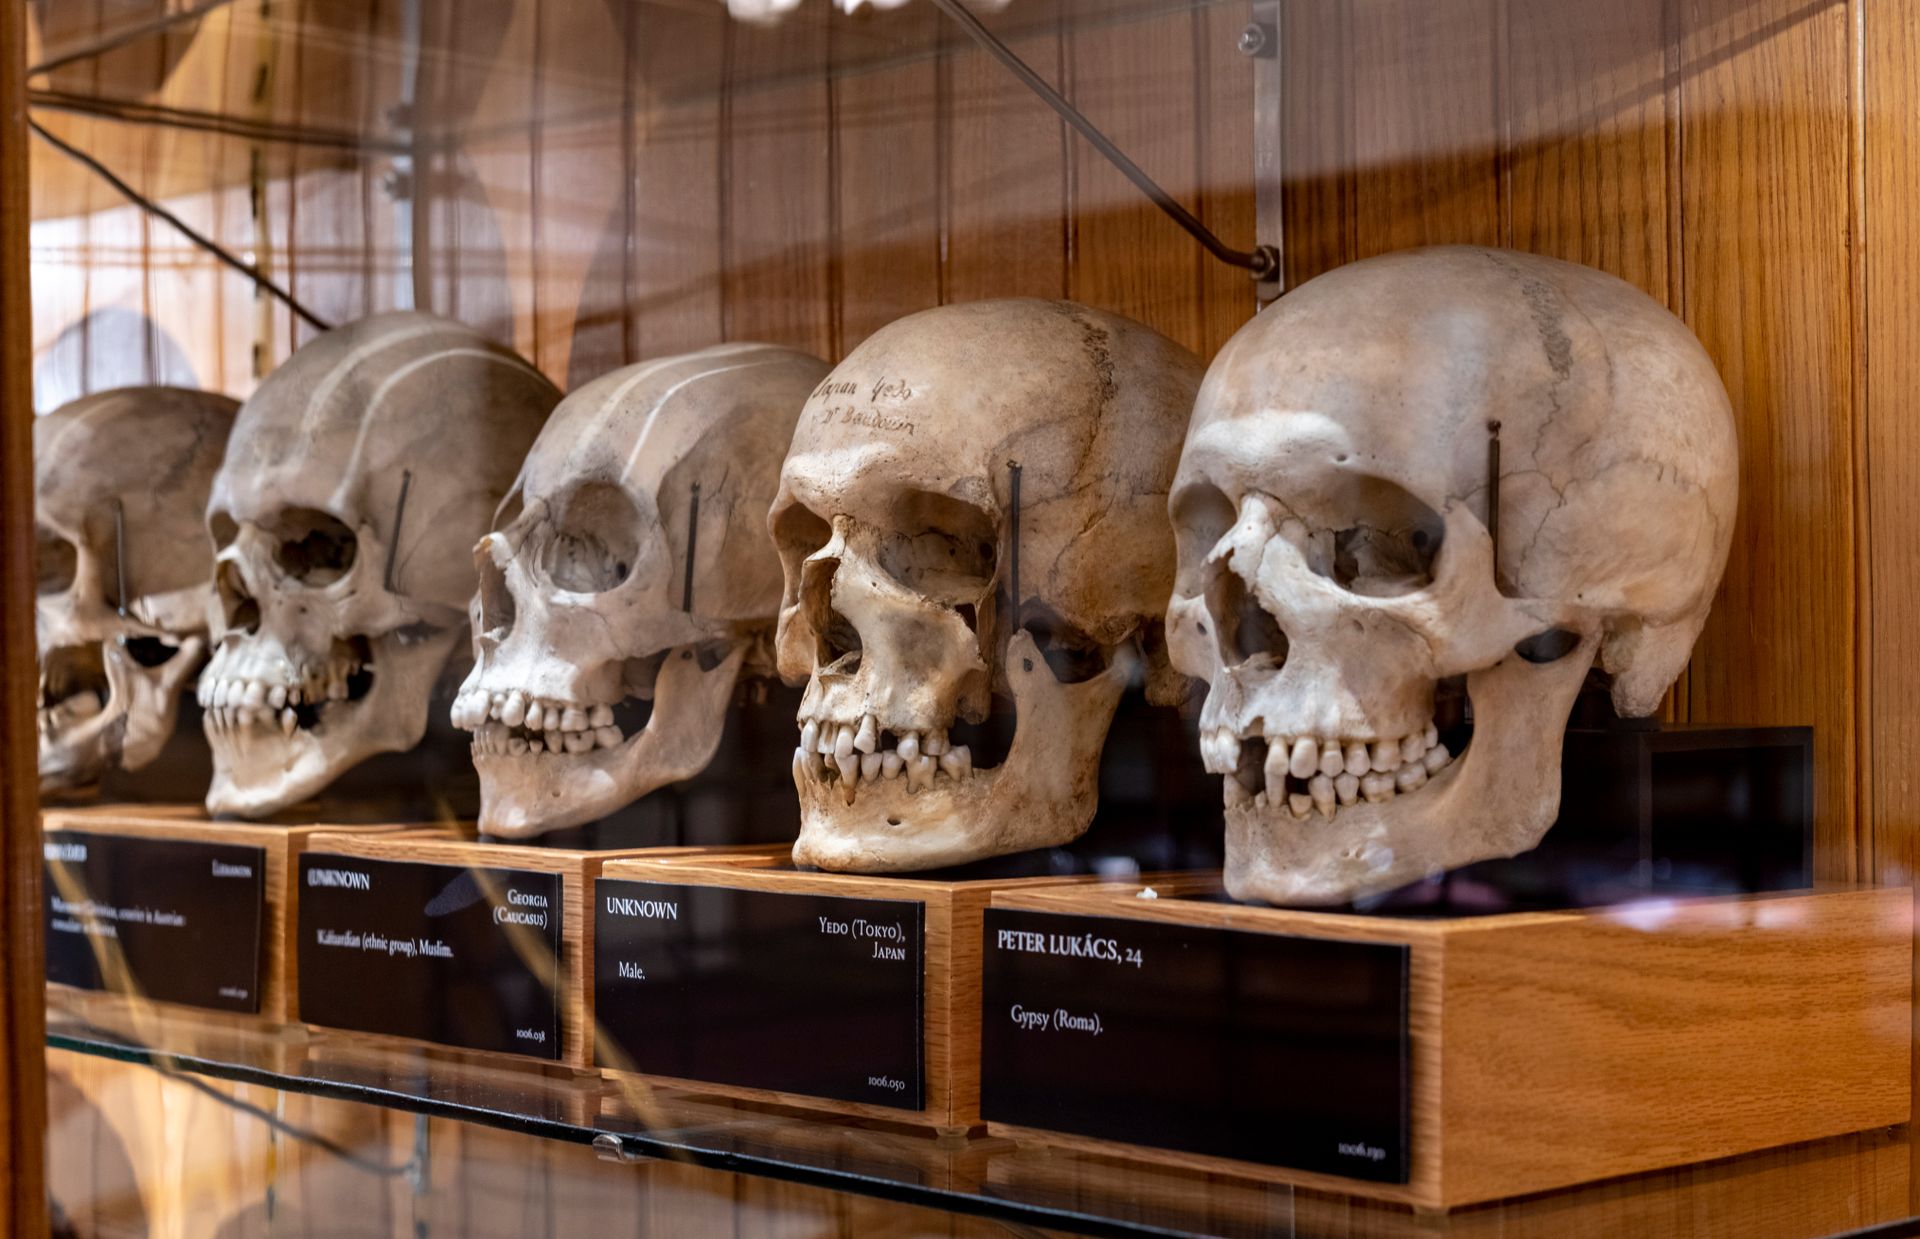 View of several skulls on a display shelf